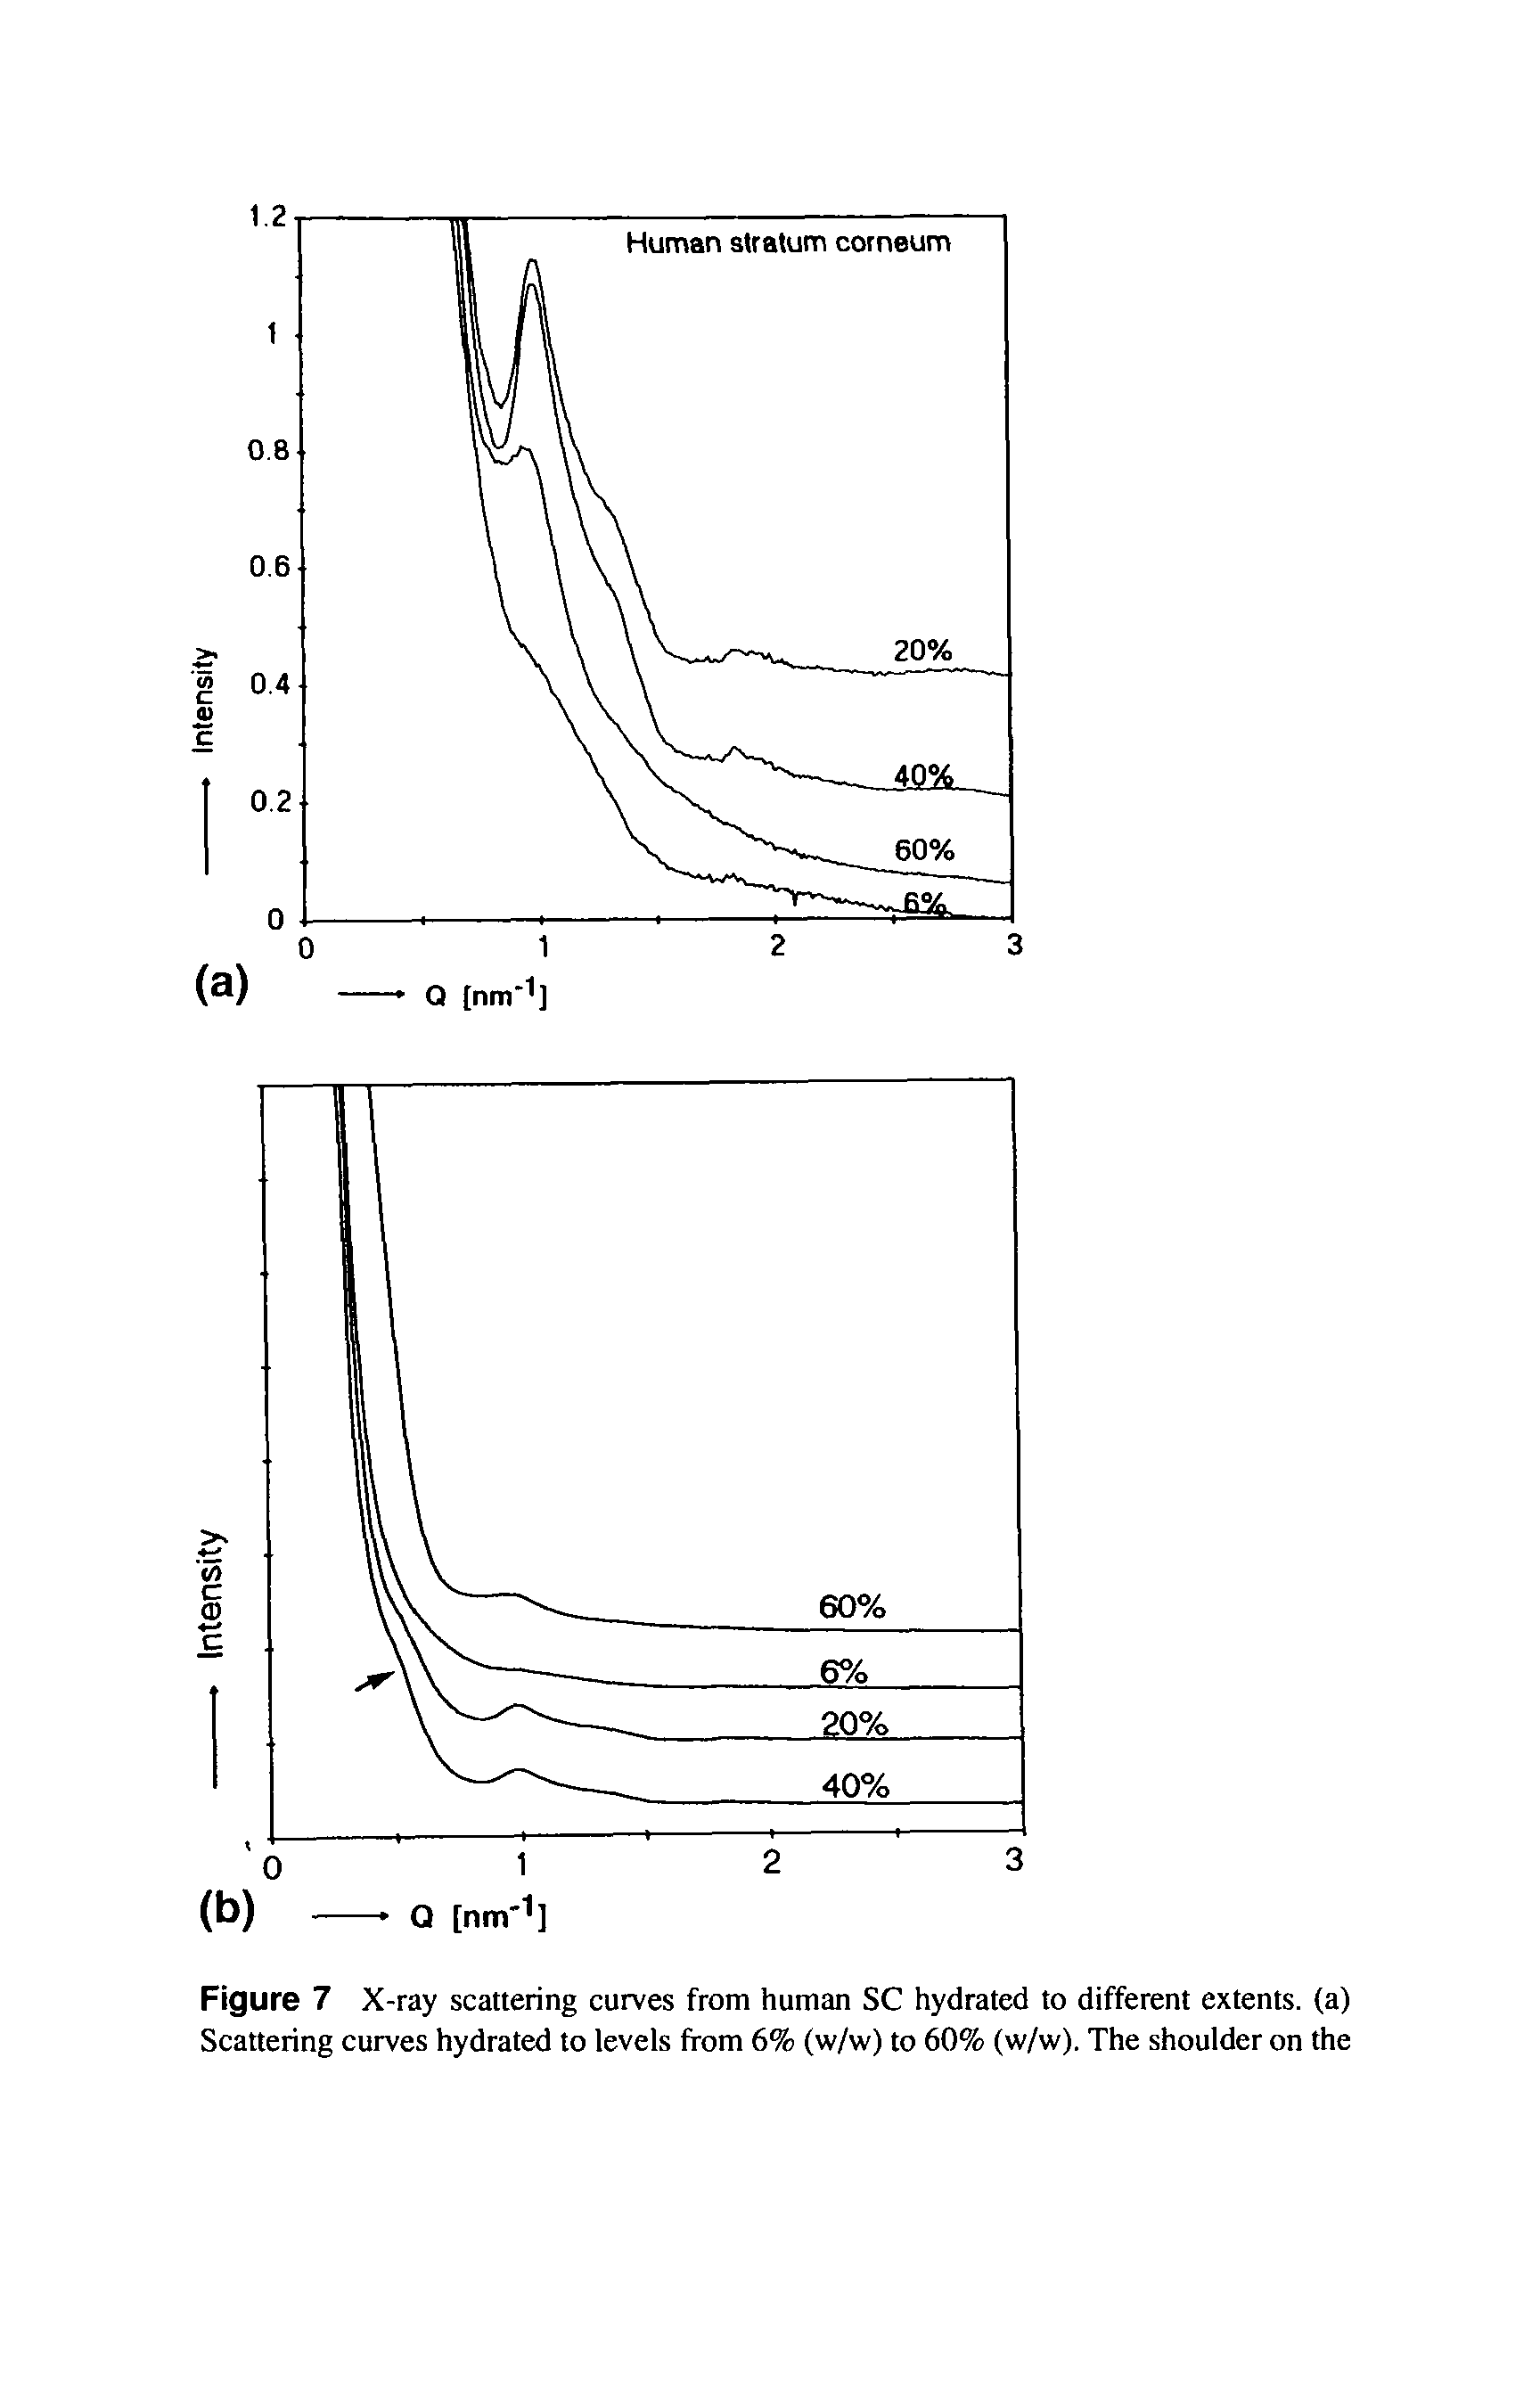 Figure 7 X-ray scattering curves from human SC hydrated to different extents, (a) Scattering curves hydrated to levels from 6% (w/w) to 60% (w/w). The shoulder on the...